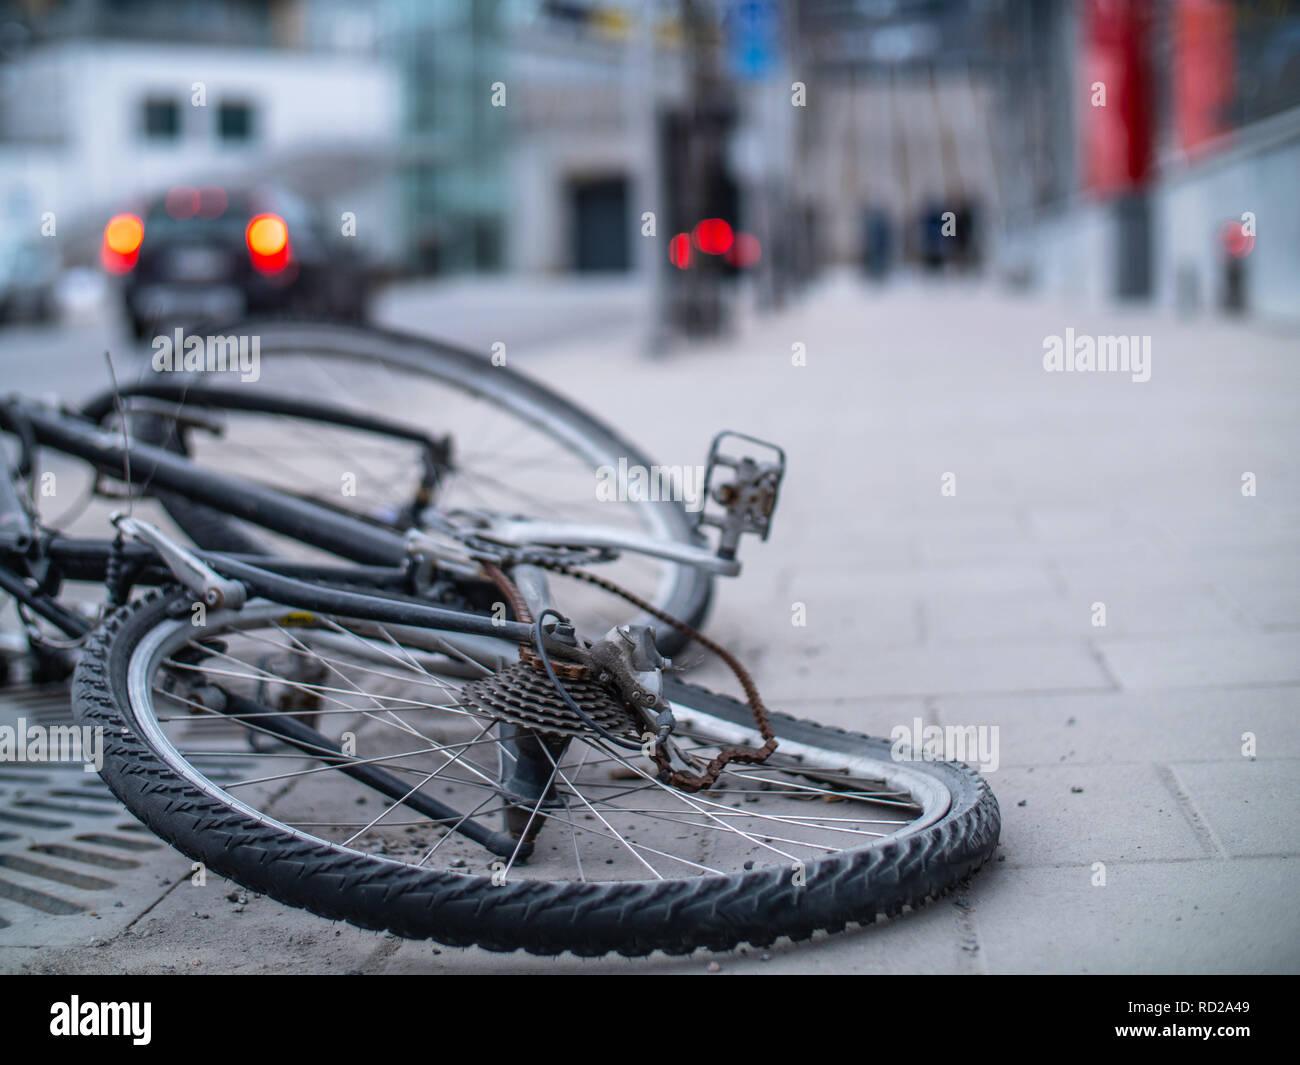 An old broken and bent bicycle with a rusted chain discarded in the street Stock Photo